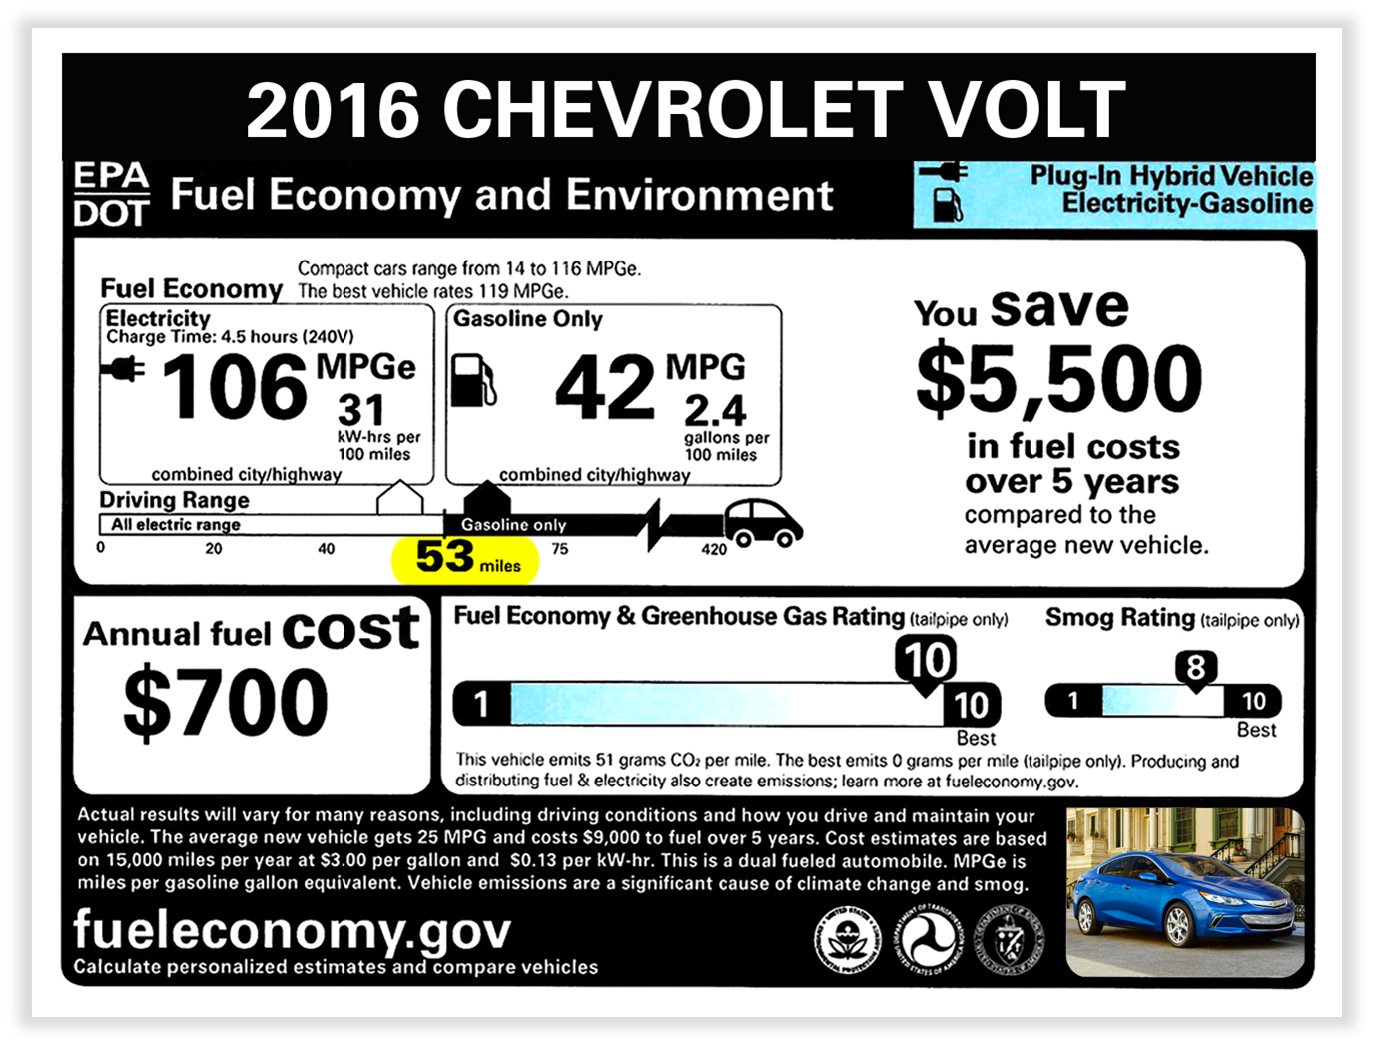 The 2016 Chevrolet Volt can run on pure electricity for 53 miles on a single charge, nearly 40 percent more than the first-generation Volt.